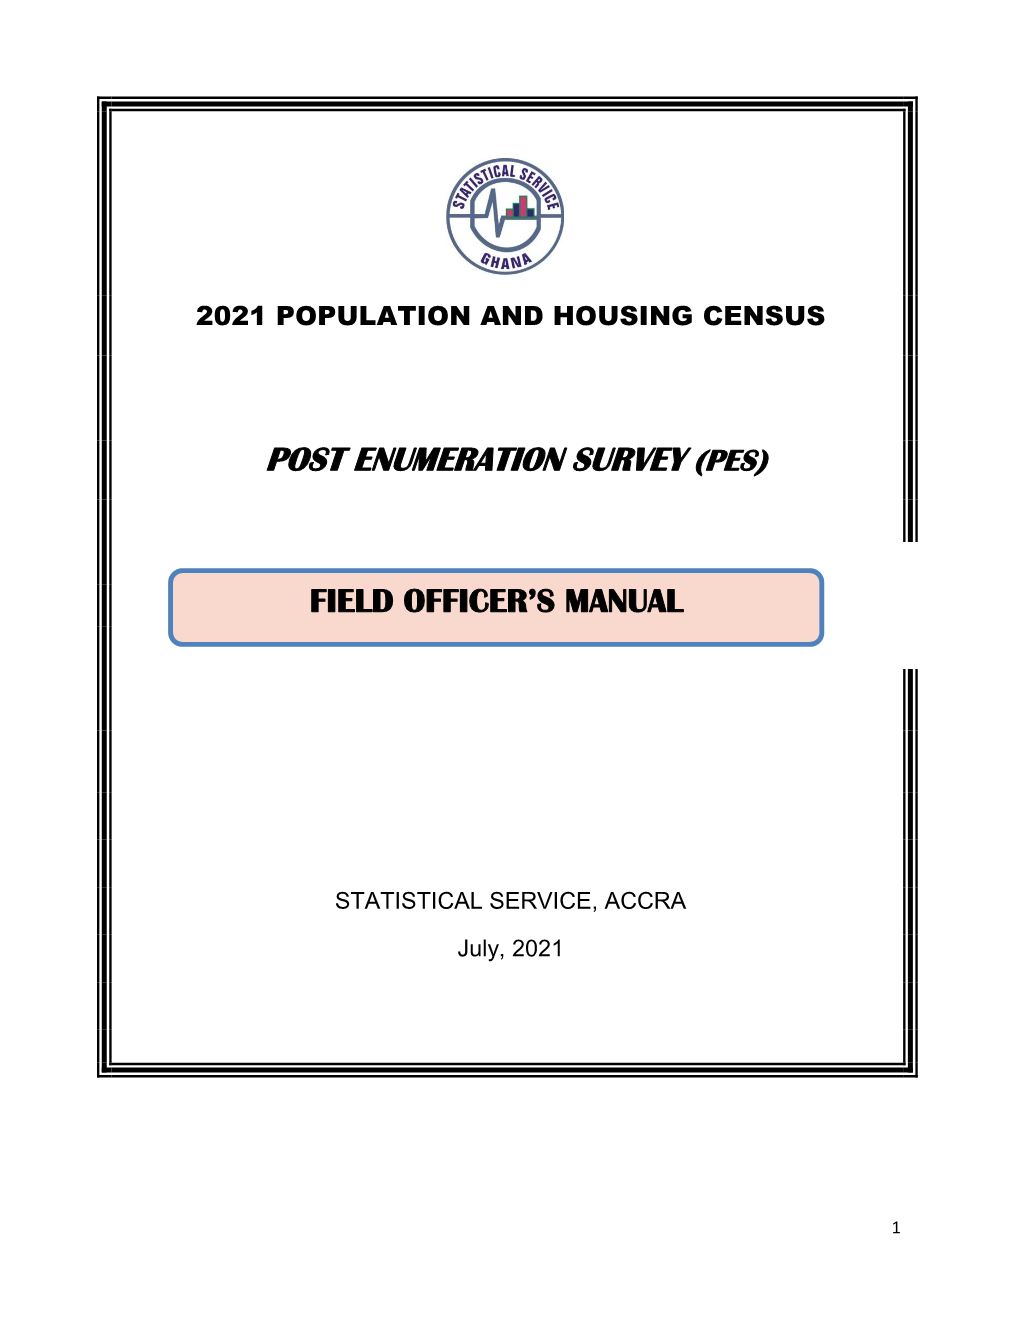 2021 PES Field Officer's Manual Download